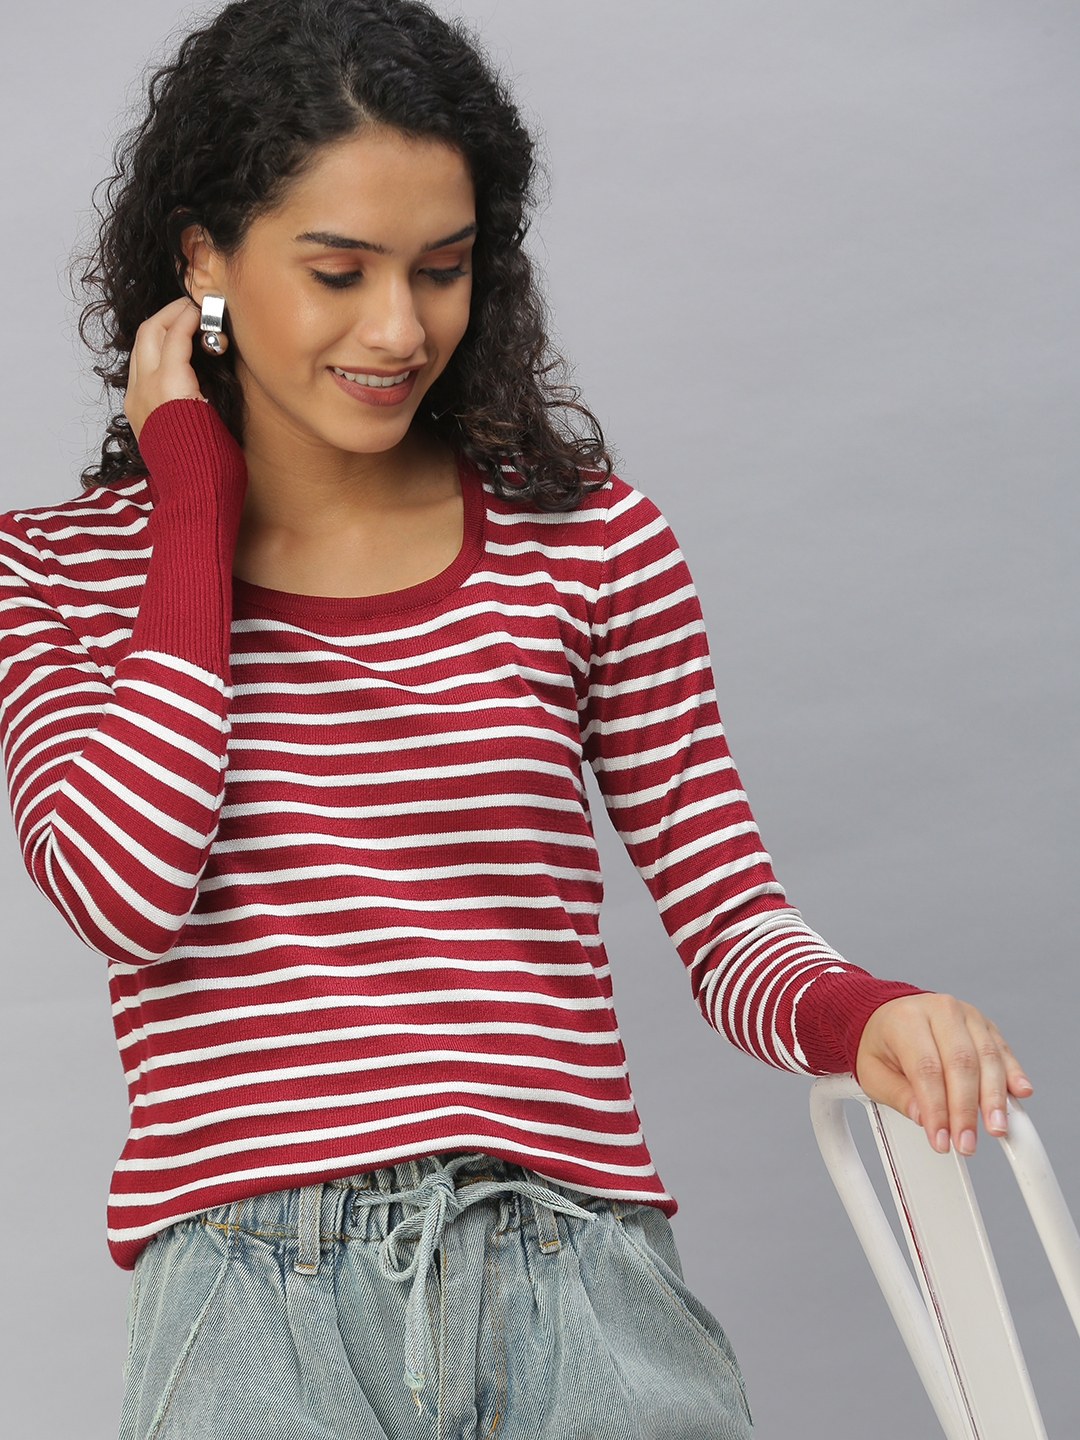 Women's Red Acrylic Striped Tops